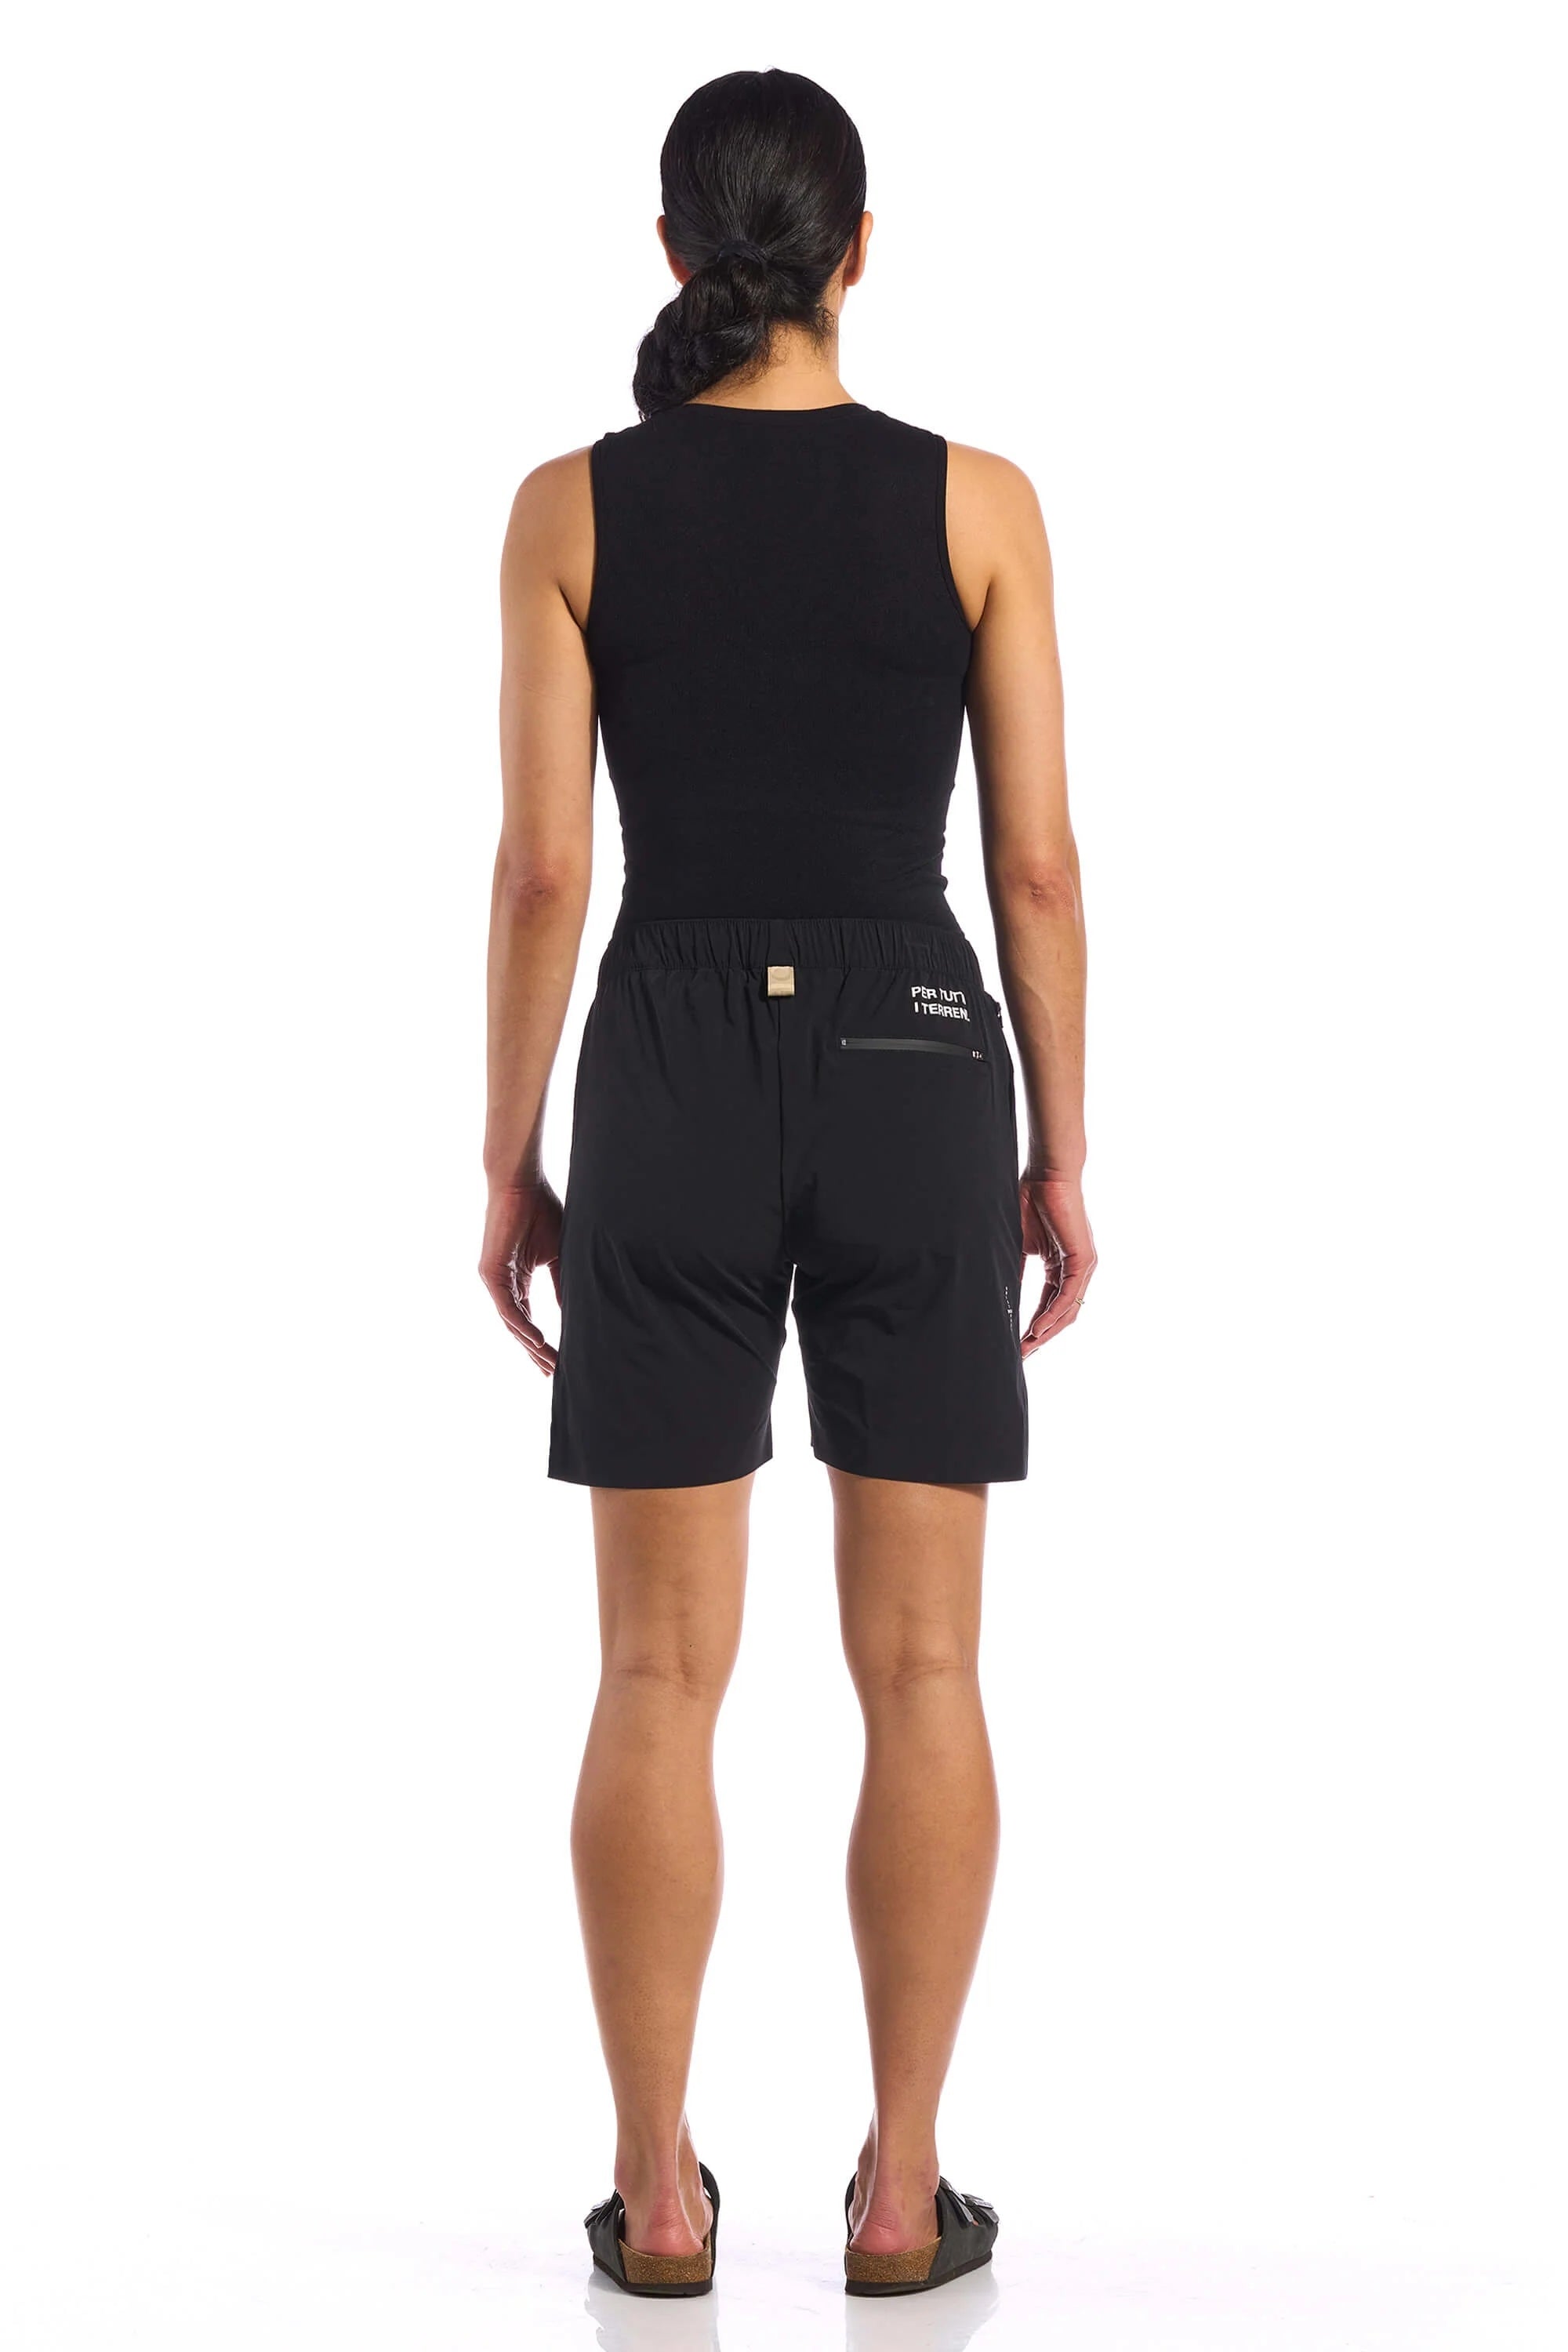 The Active Shorts 8"